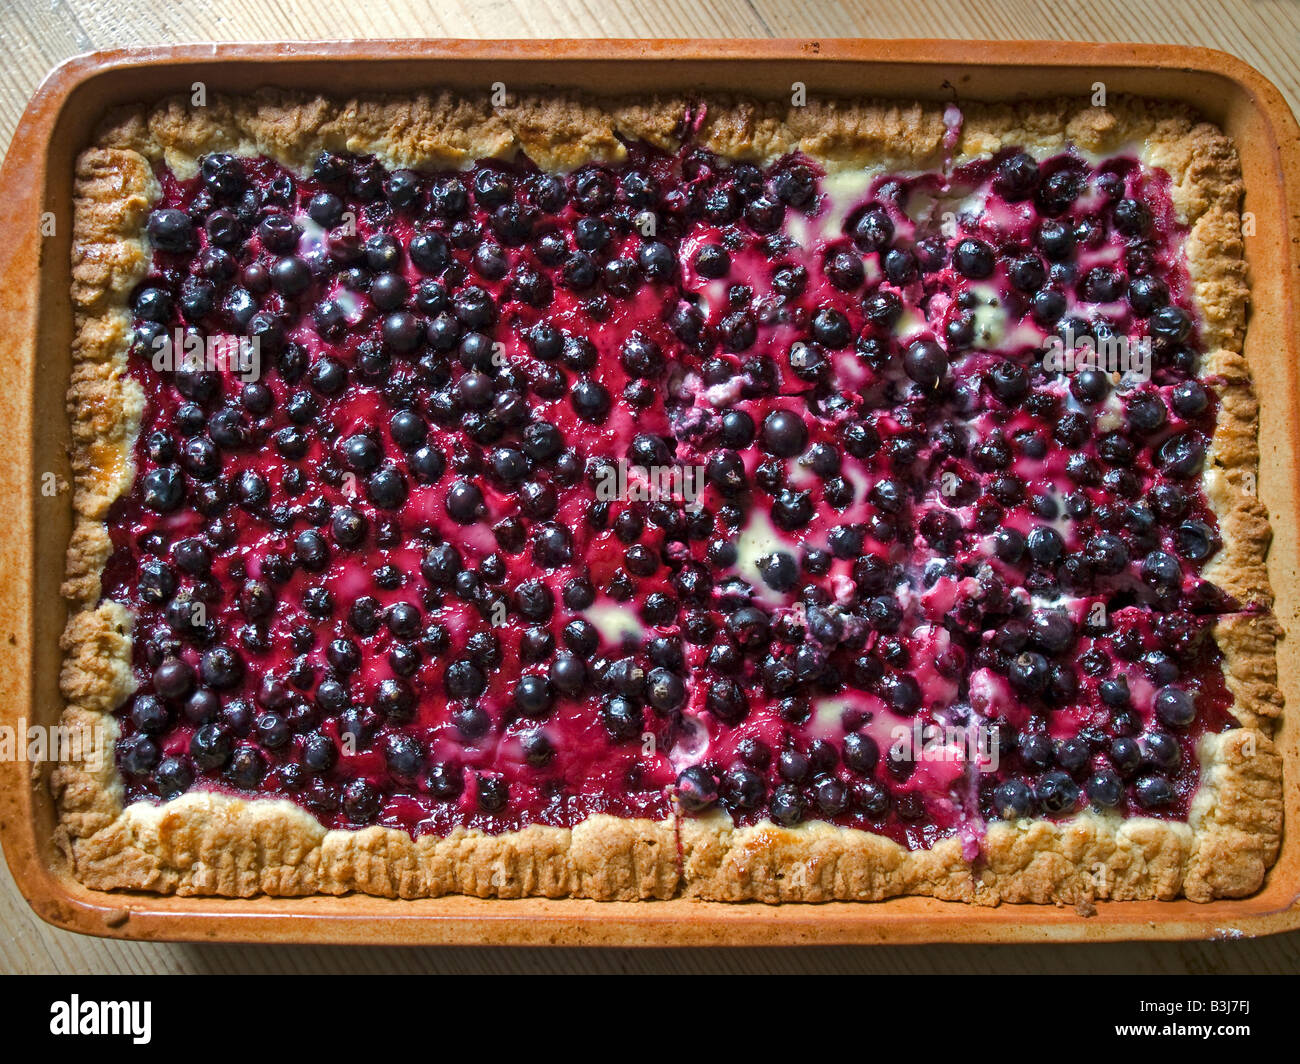 home made cake with black currant berries in casserole dish Stock Photo